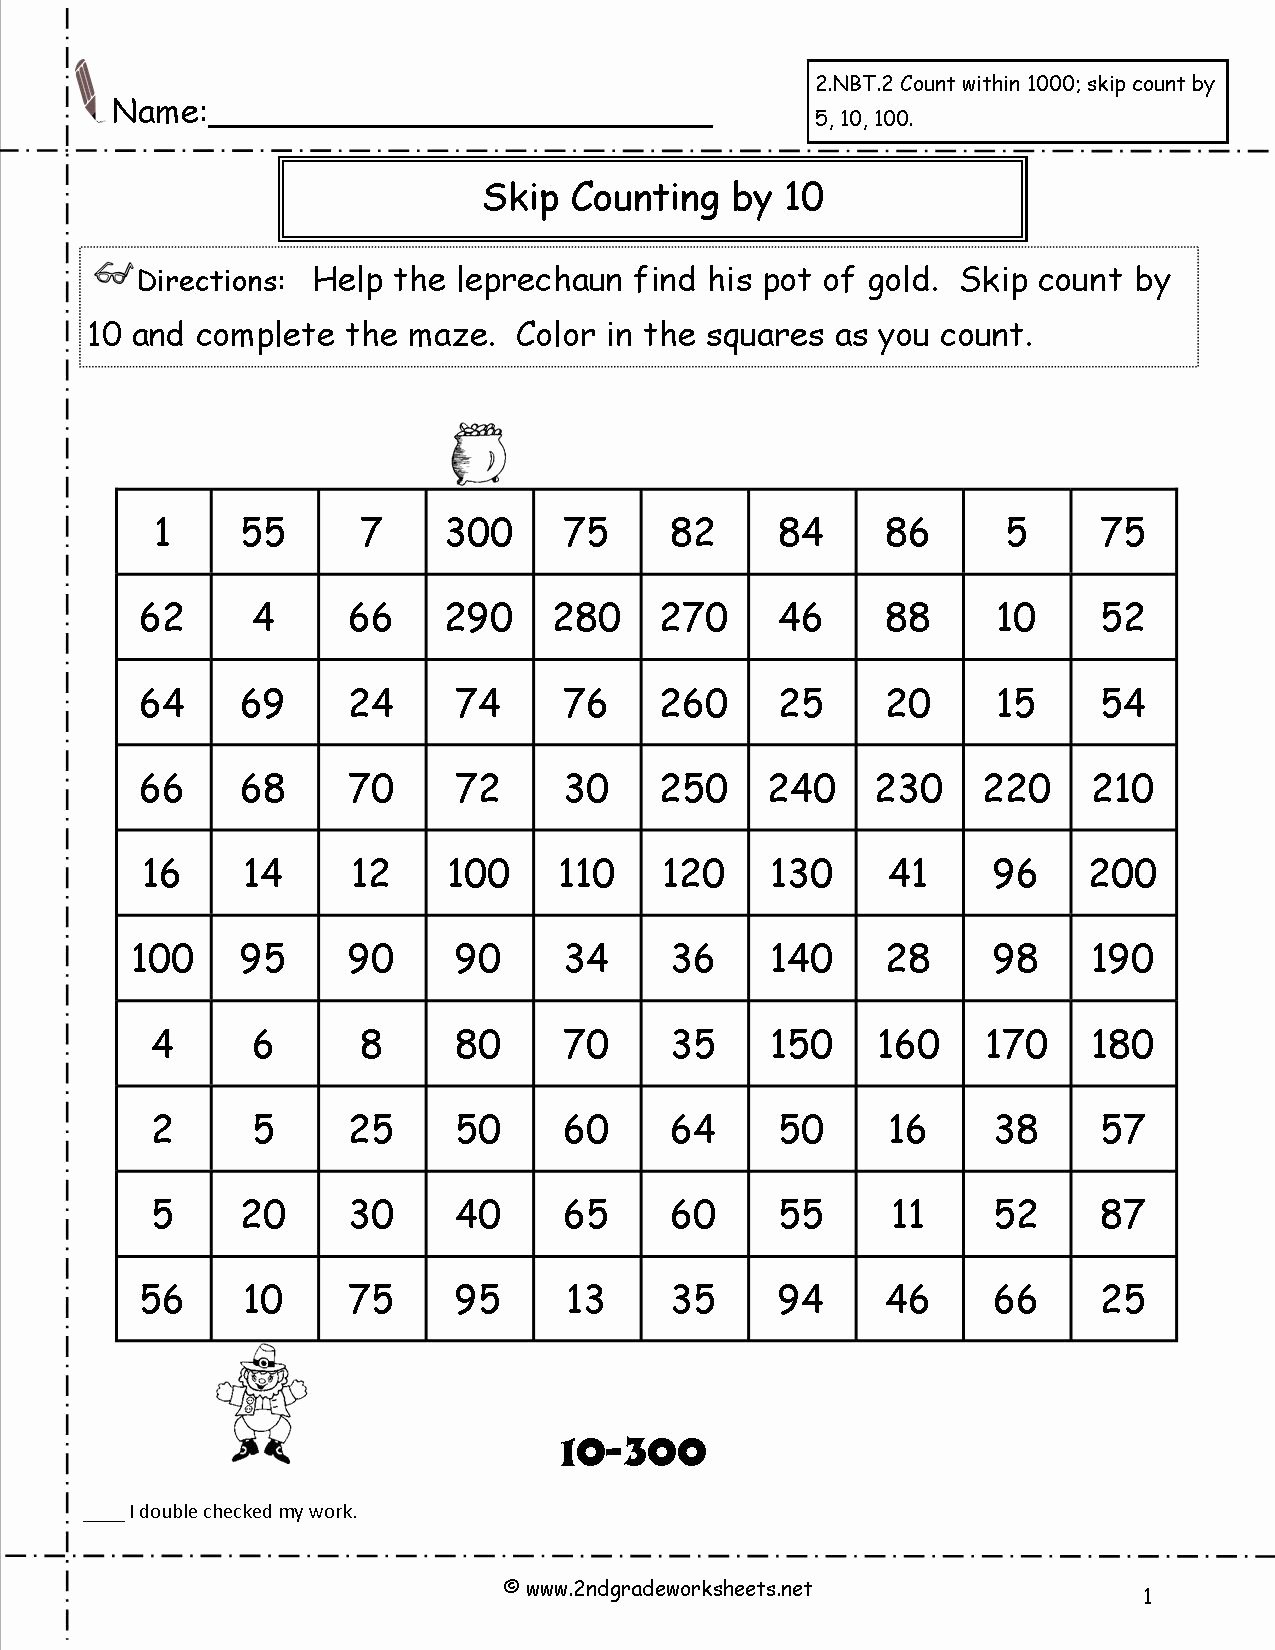 Counting by 10s Worksheet New Free Skip Counting Worksheets